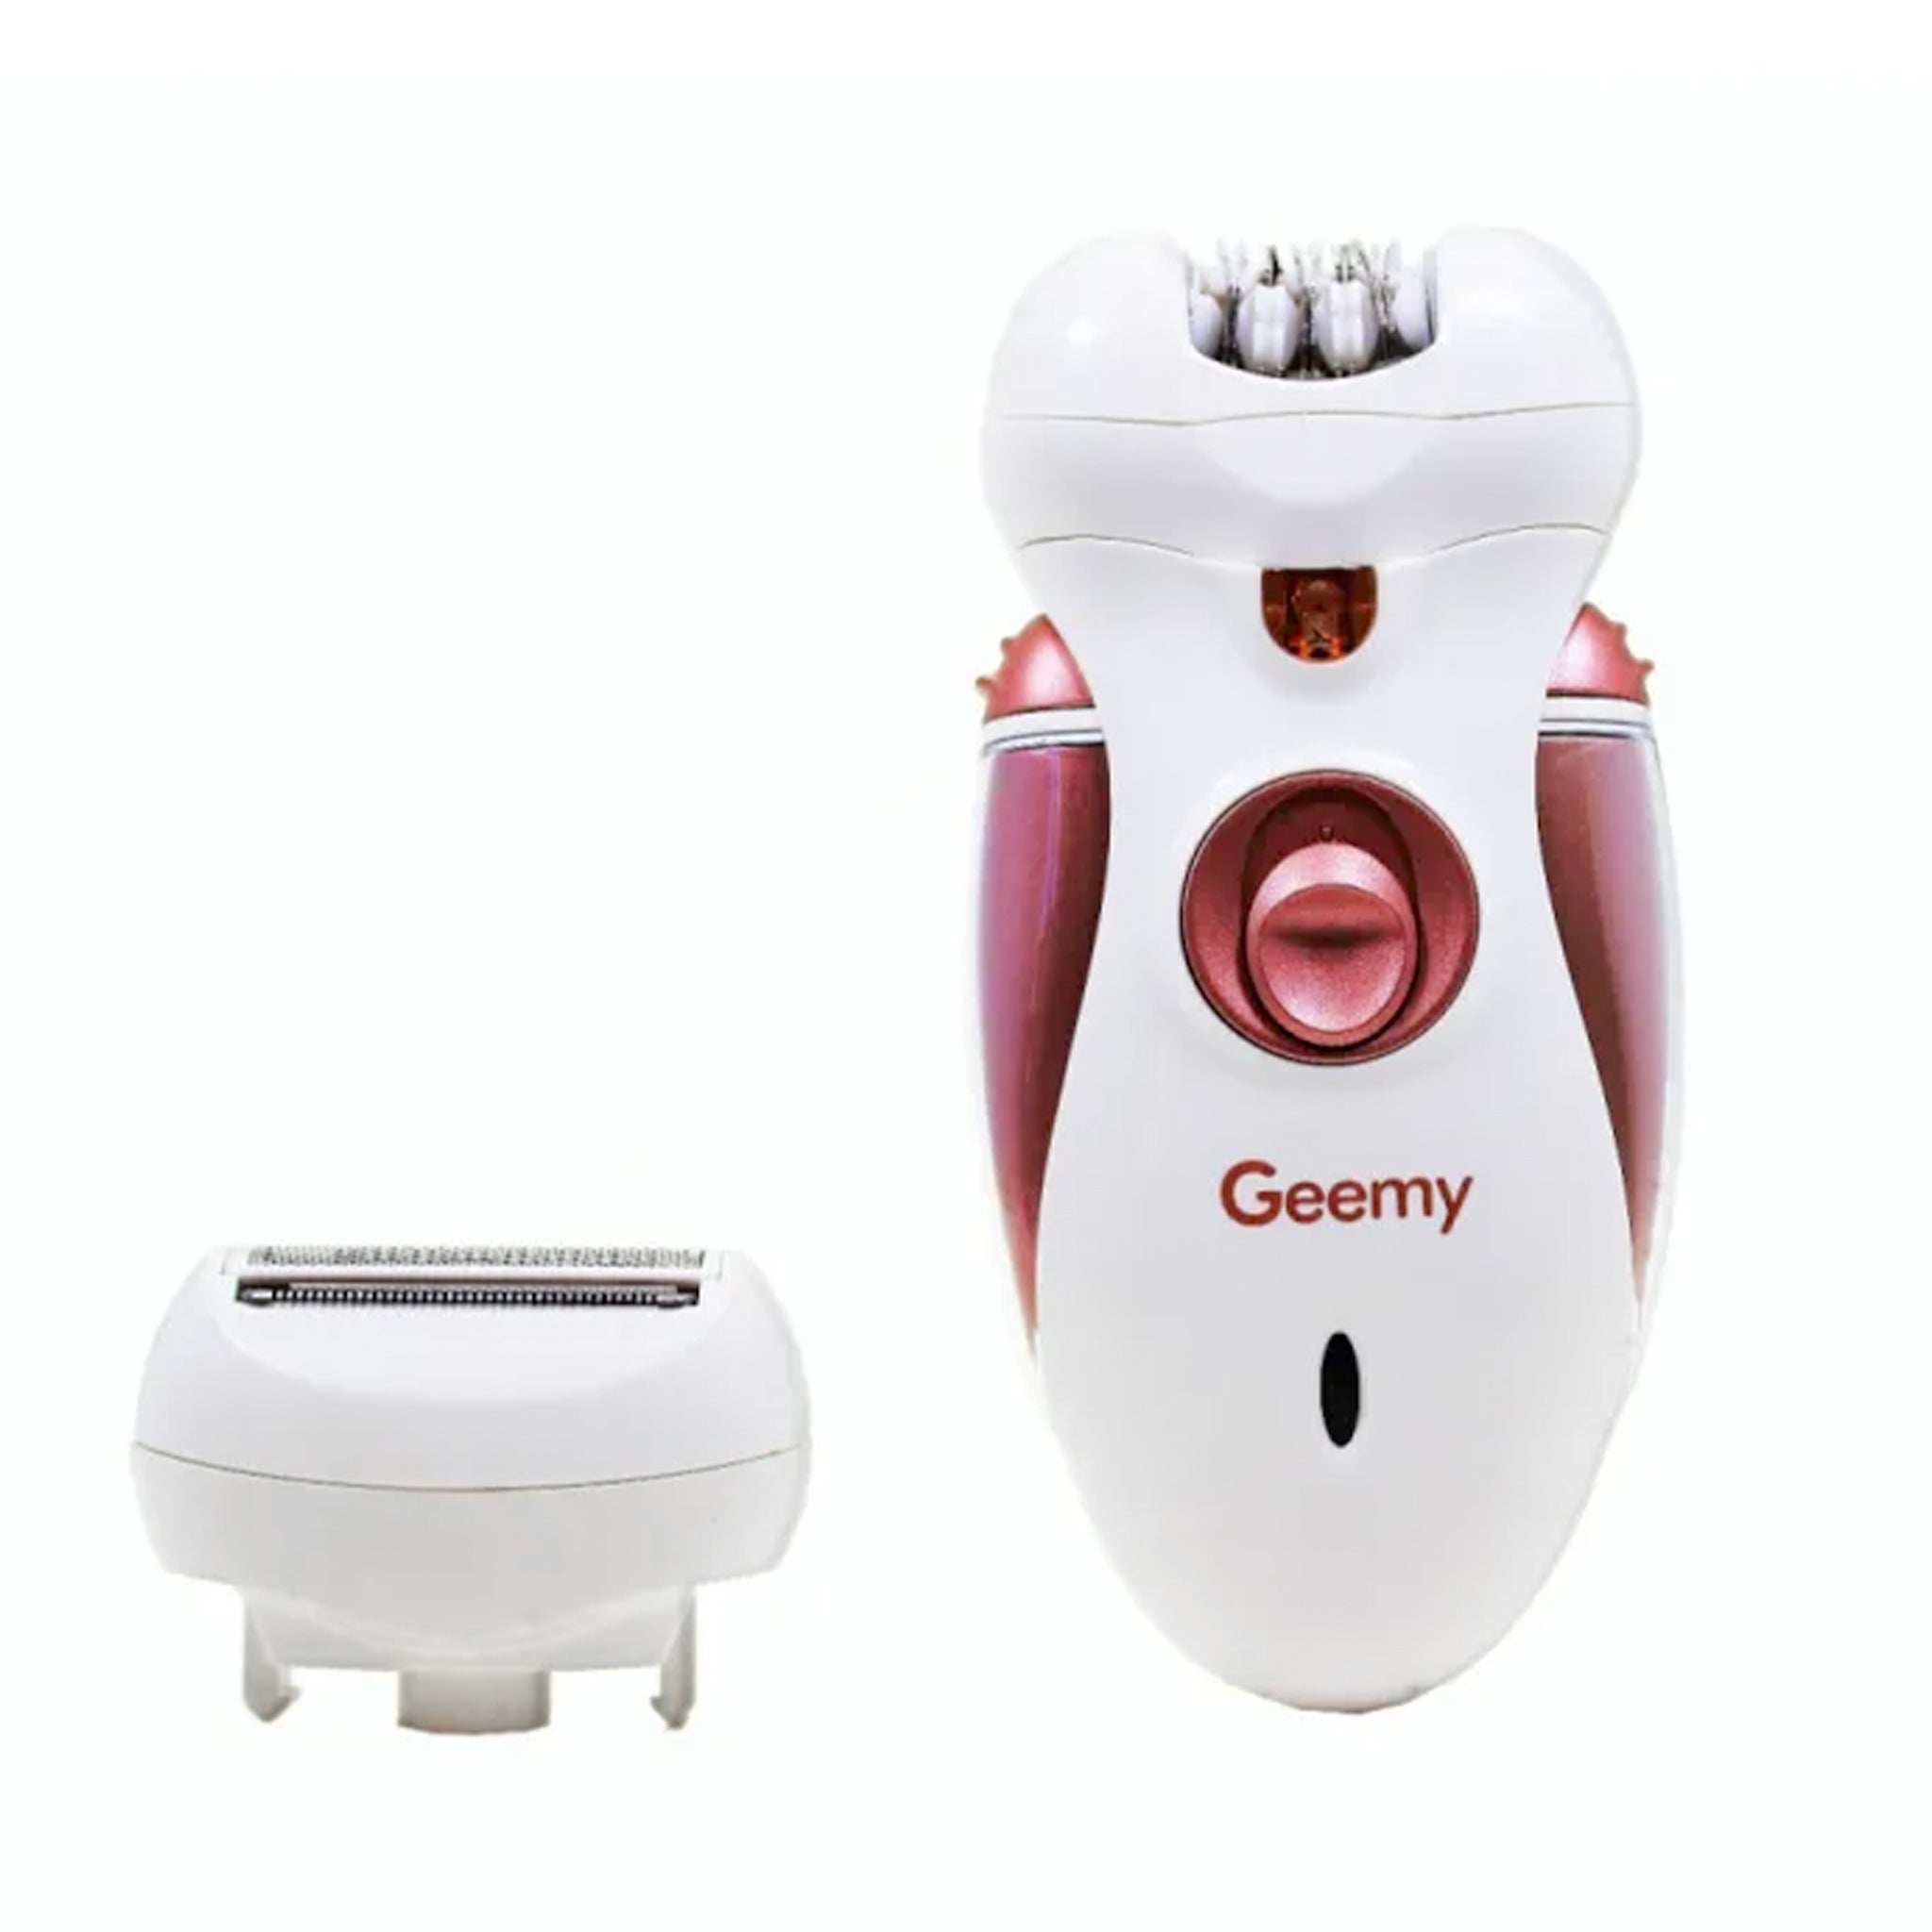 Gemmy Rechargeable Epilator and Shaver